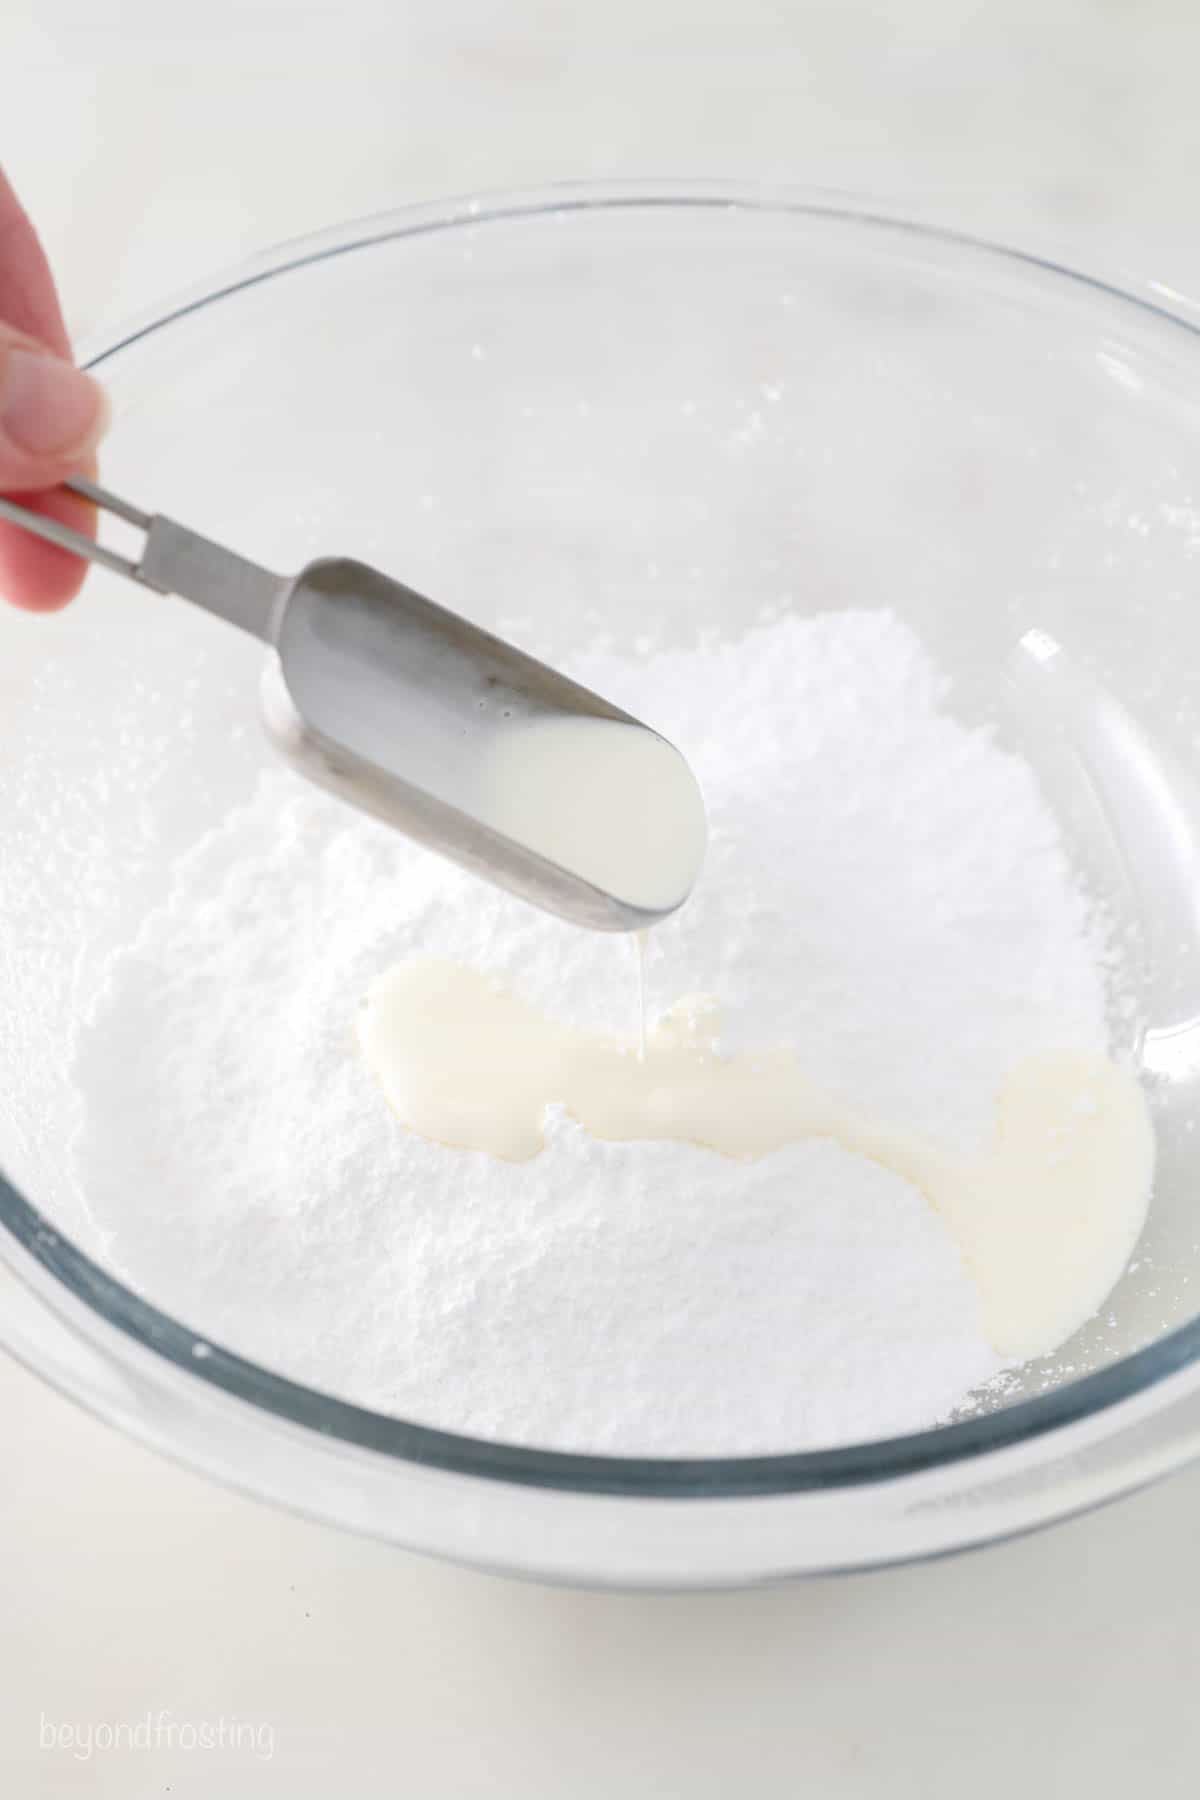 Two tablespoons of milk being poured into a bowl full of sifted powdered sugar